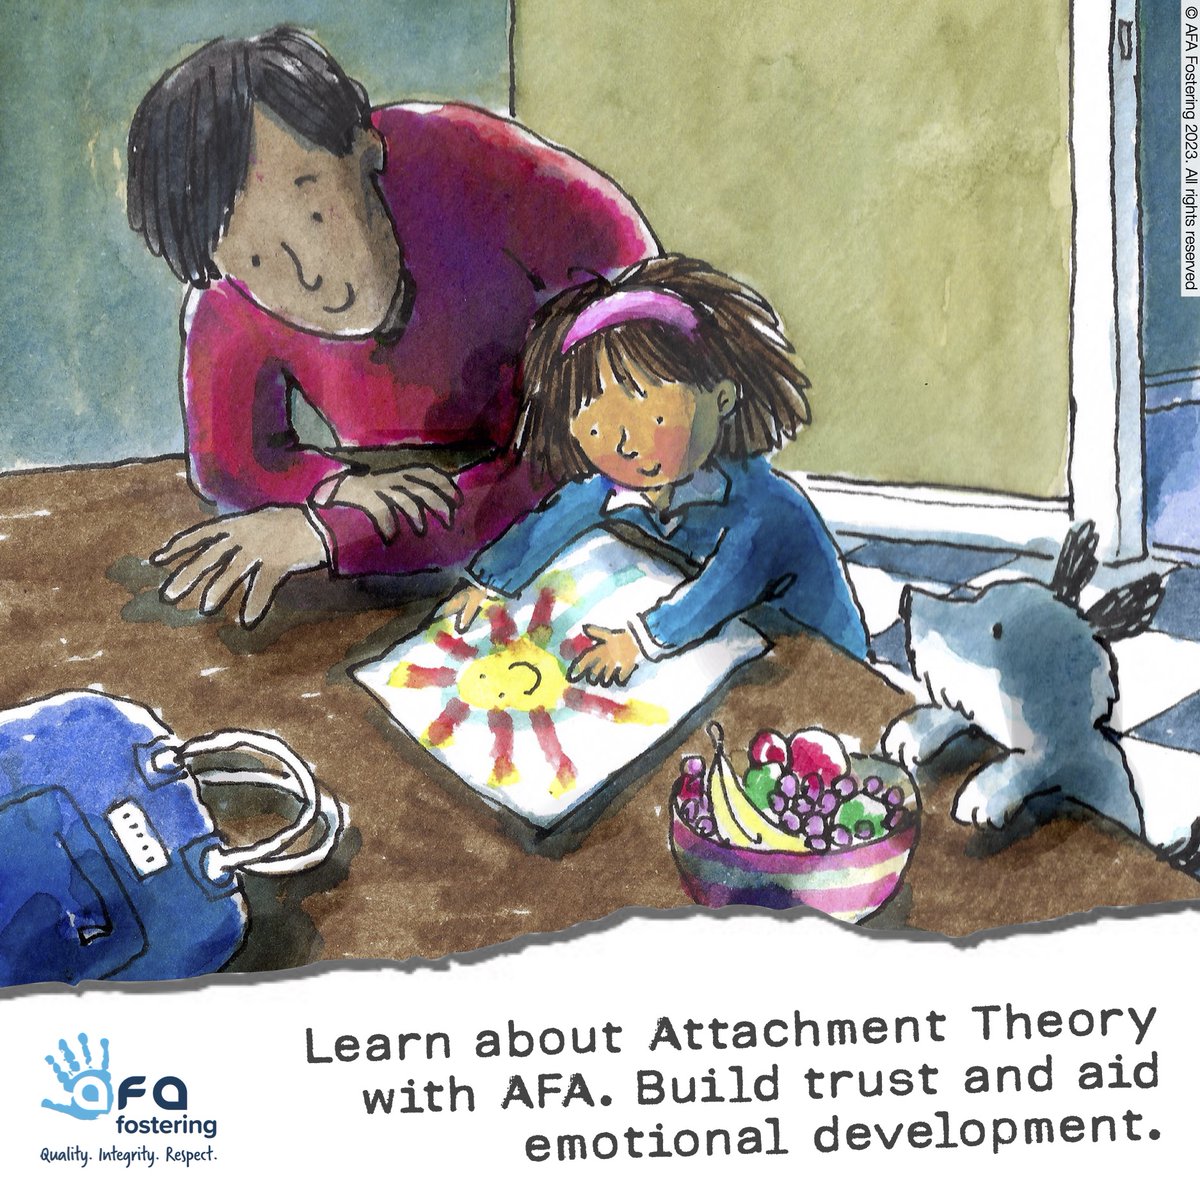 Learn attachment theory with AFA Fostering. Empower kids with trust, self-assurance, and stability. Ready to impact young lives? Call 0333 358 3217. #EmpowerWithAttachment #FosterGrowth